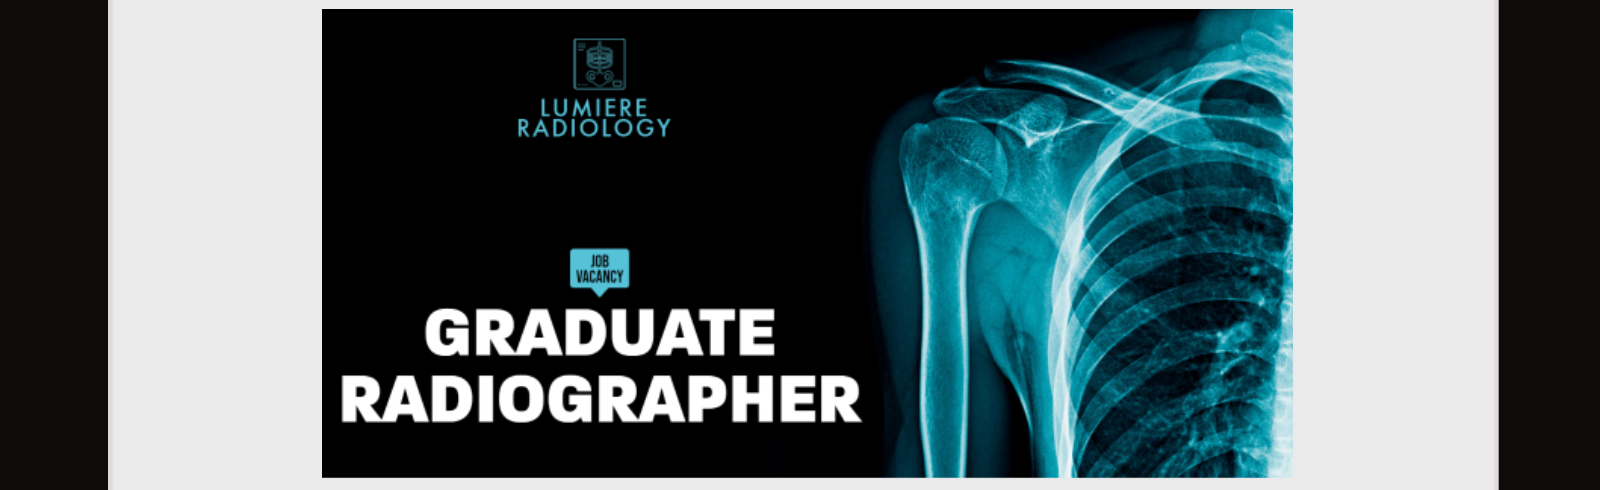 First banner on the tablet says "Lumiere radiology. Job vacancy: graduate radiographer".